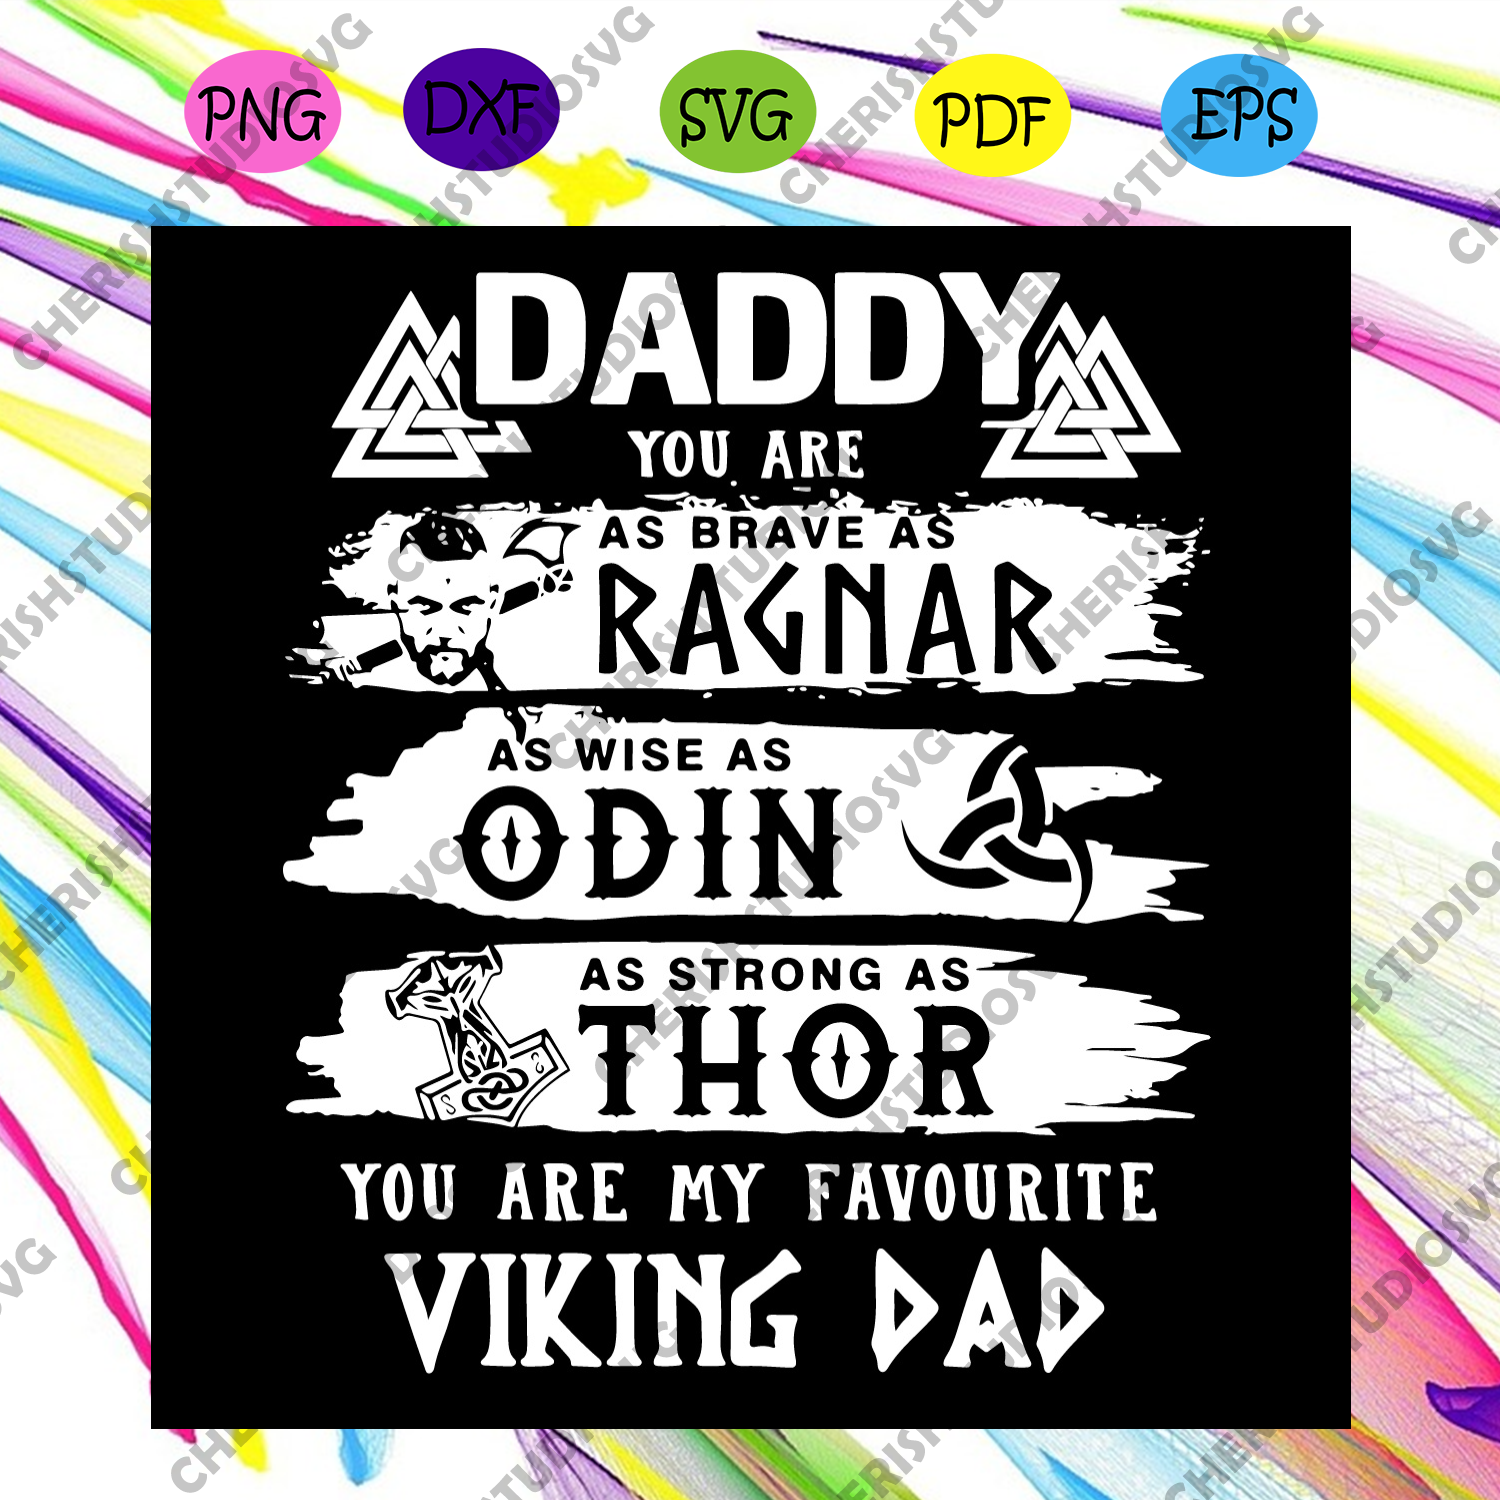 Download Daddy You Are My Favourite Viking Dad Svg Fathers Day Svg Daddy Svg Cherishsvgstudio